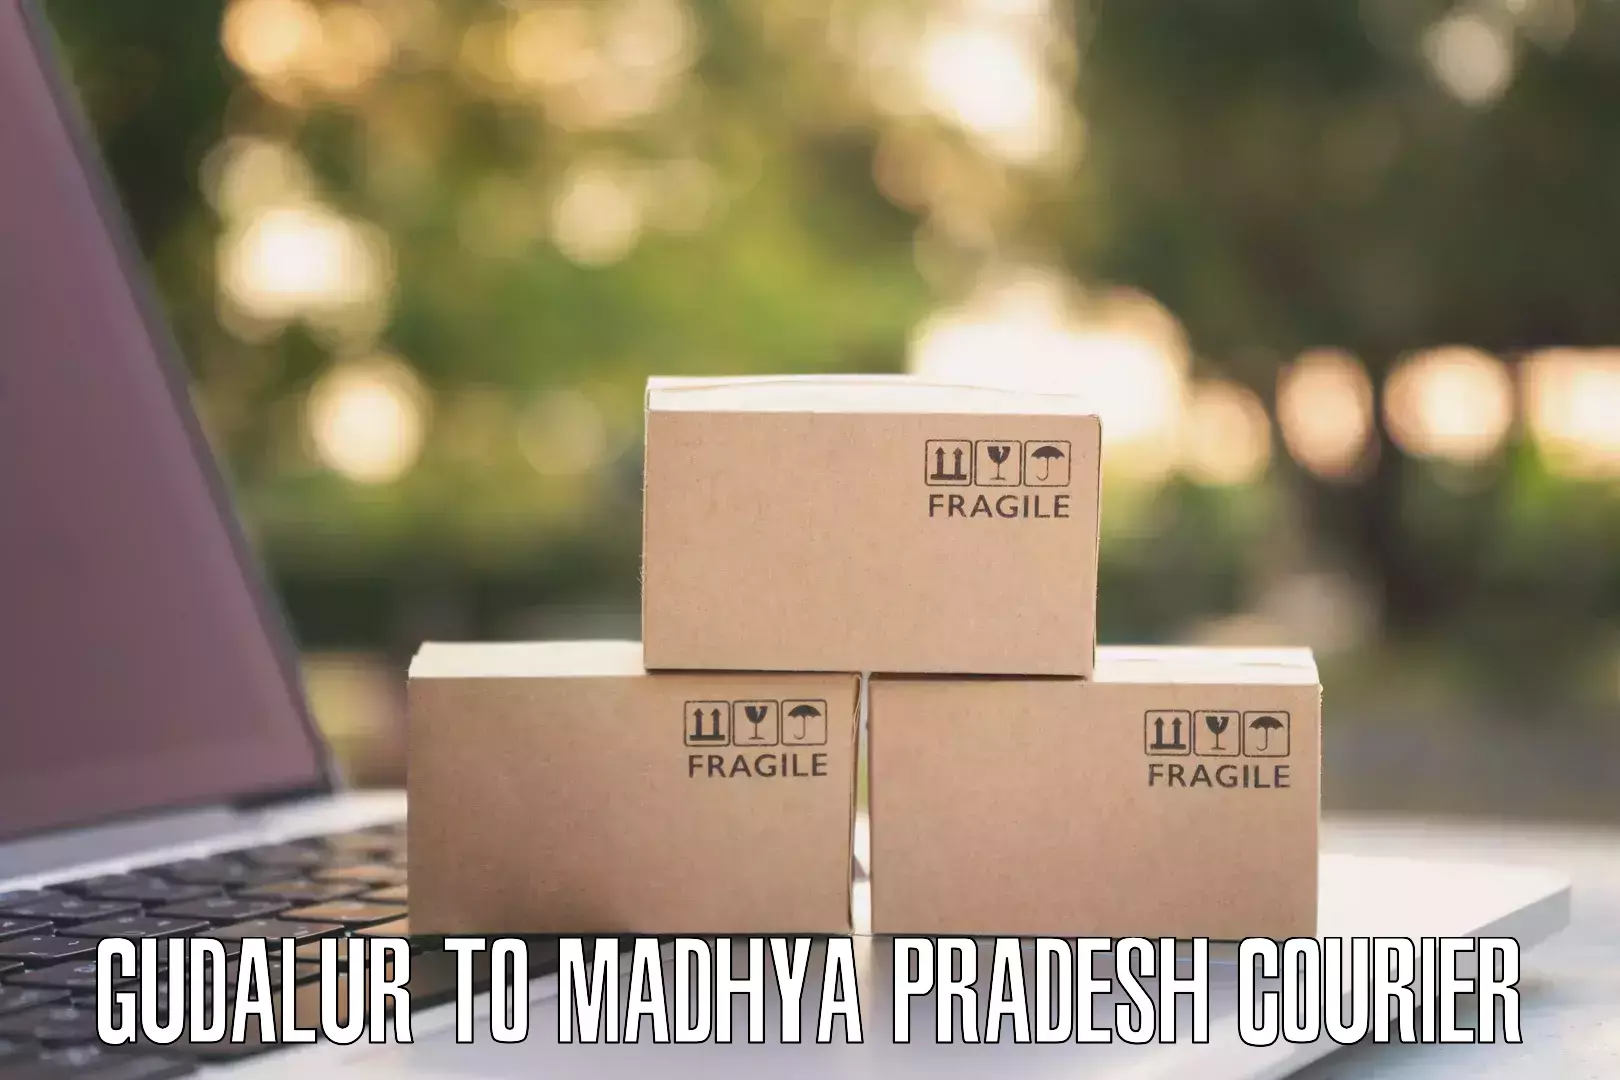 Efficient package consolidation in Gudalur to Pachore